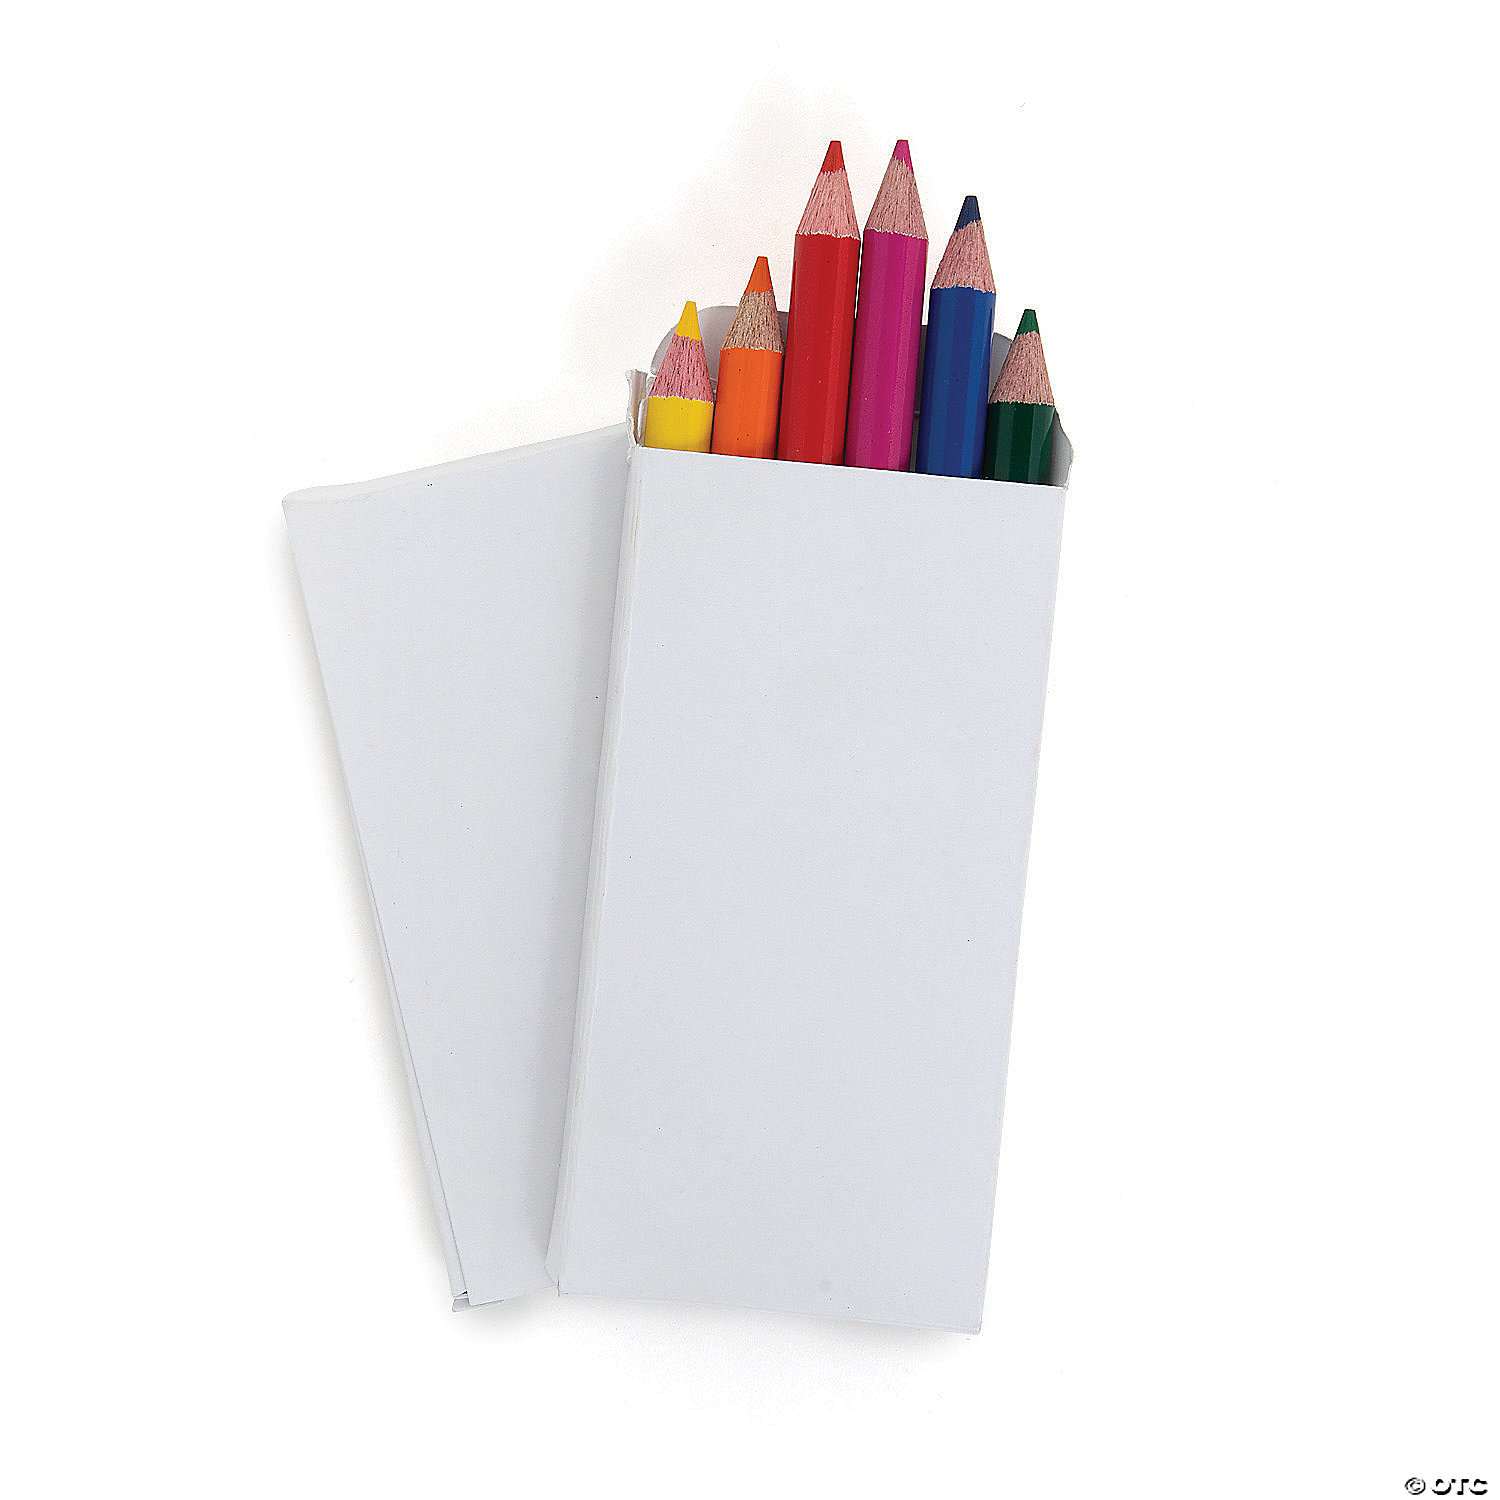 https://s7.orientaltrading.com/is/image/OrientalTrading/VIEWER_ZOOM/6-color-small-colored-pencils~13973075